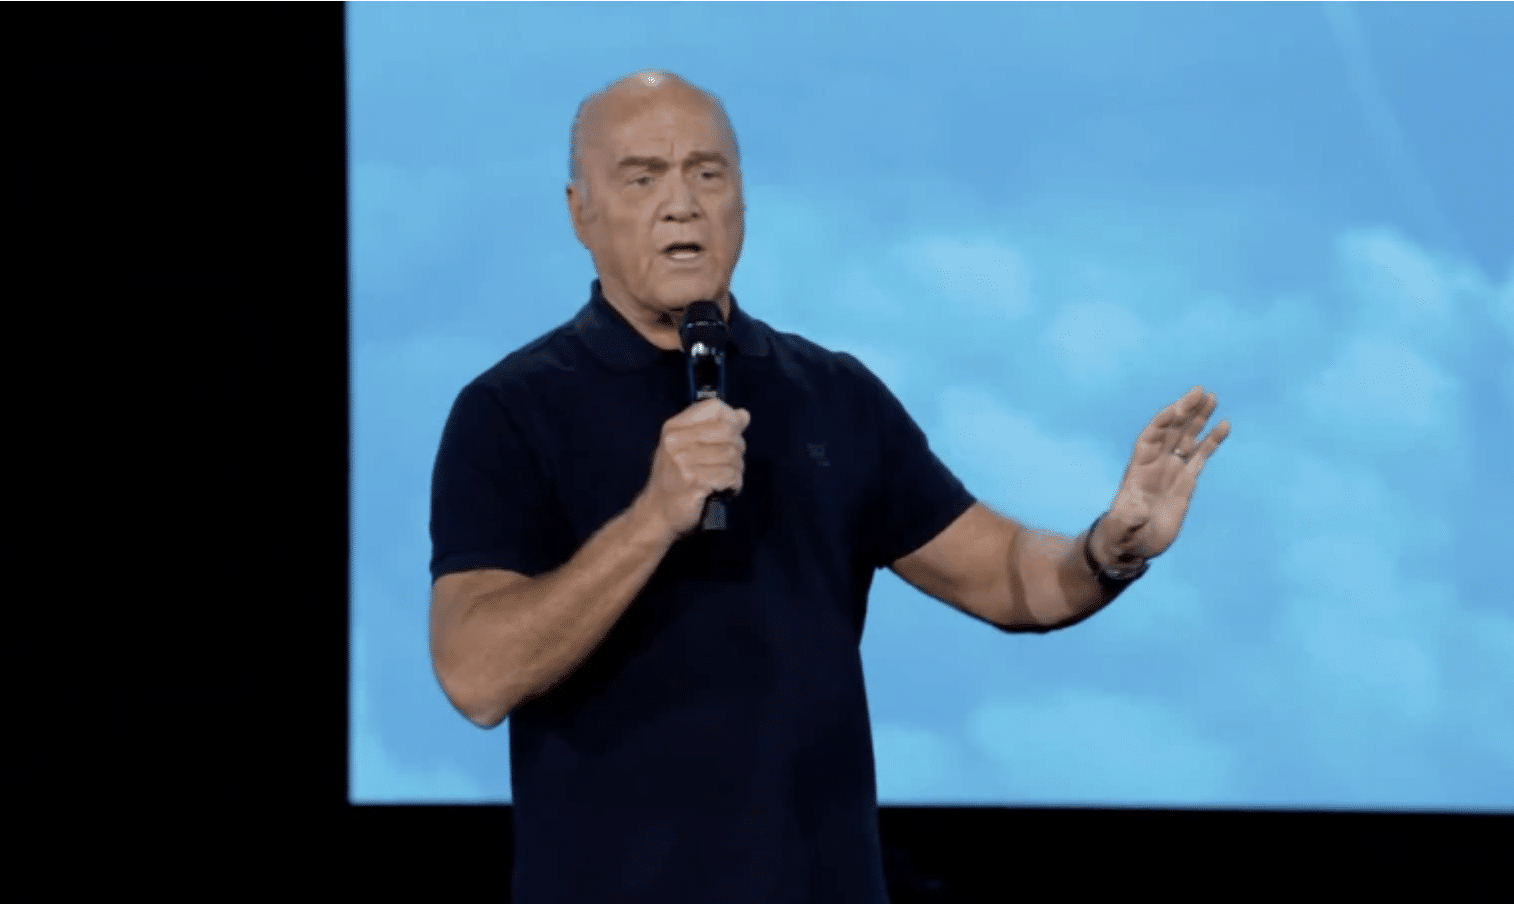 Greg Laurie says the rapture is next event on prophetic calendar: ‘Get right with God’